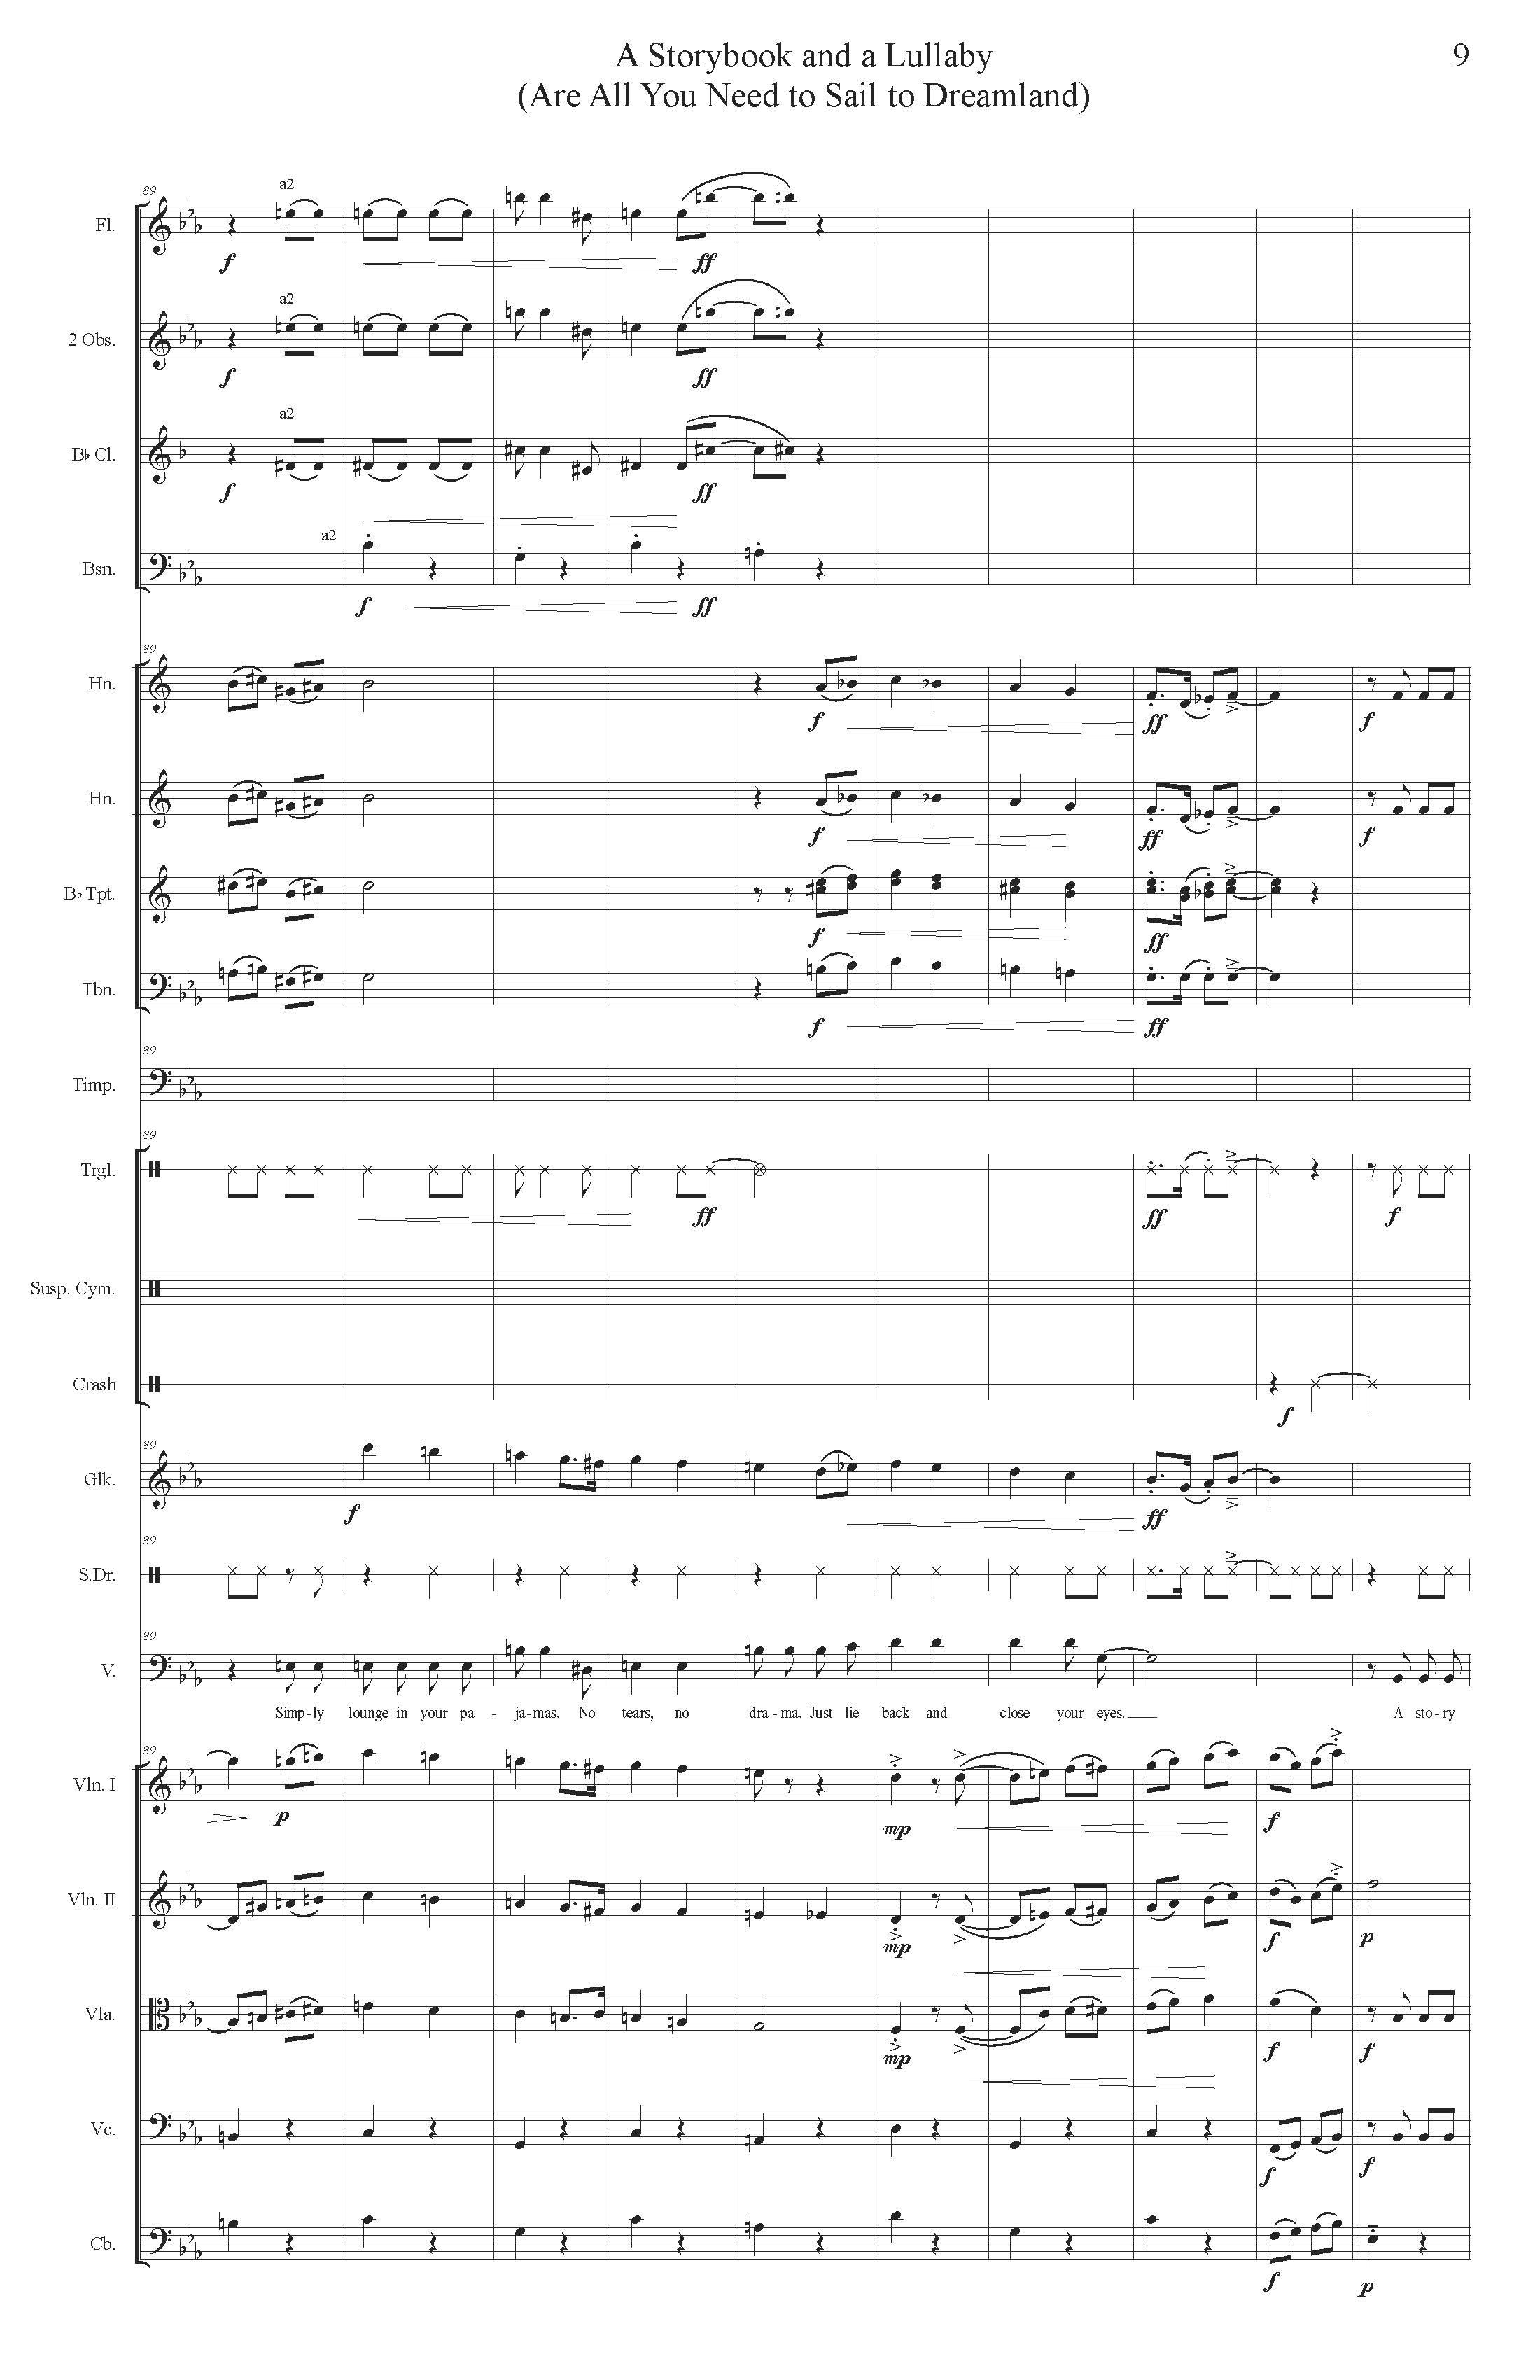 A STORYBOOK AND A LULLABY ORCH - Score_Page_09.jpg